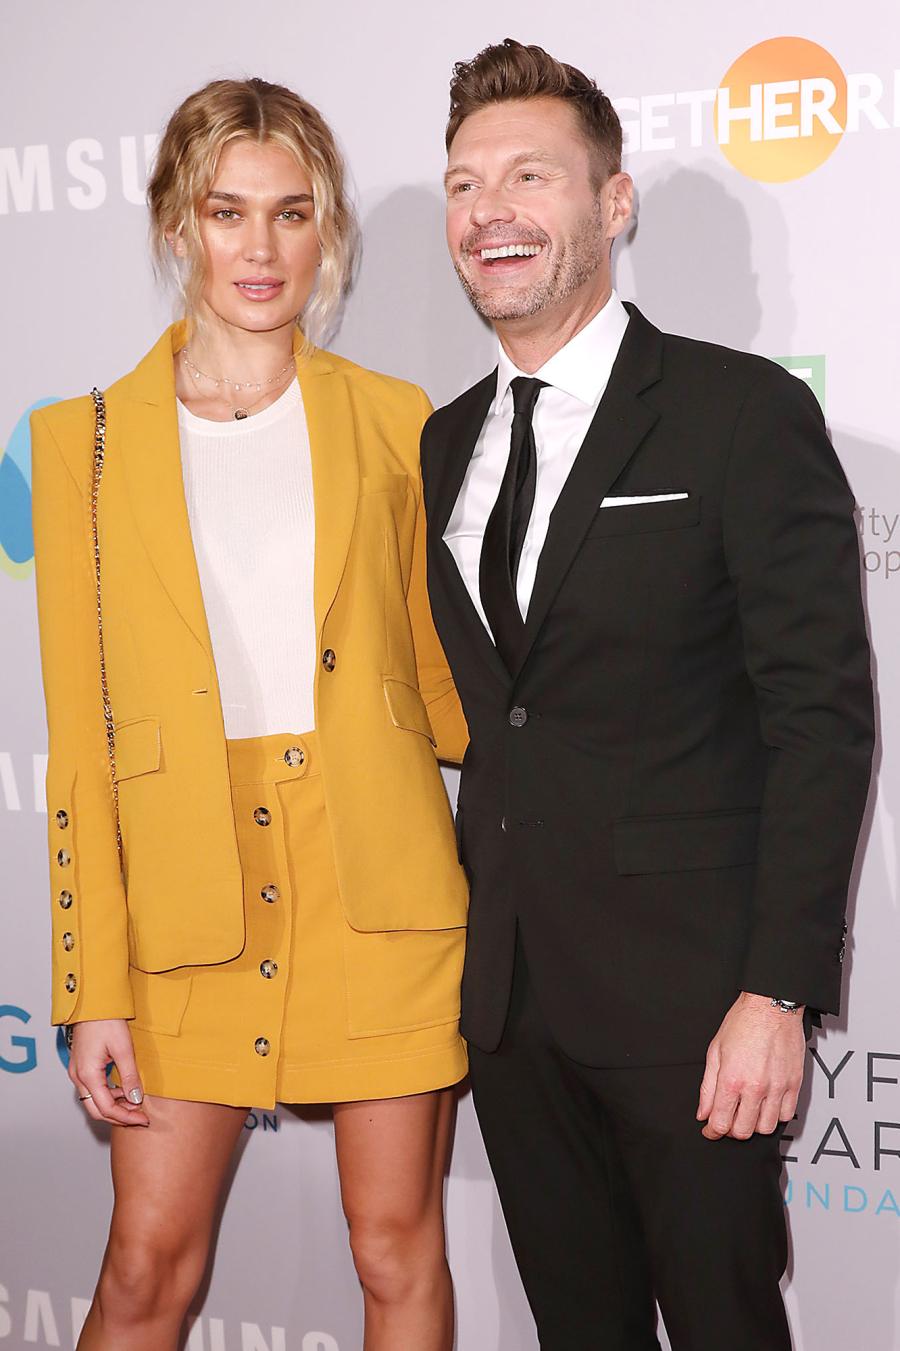 Ryan Seacrest Hints He and Shayna Taylor Back Together